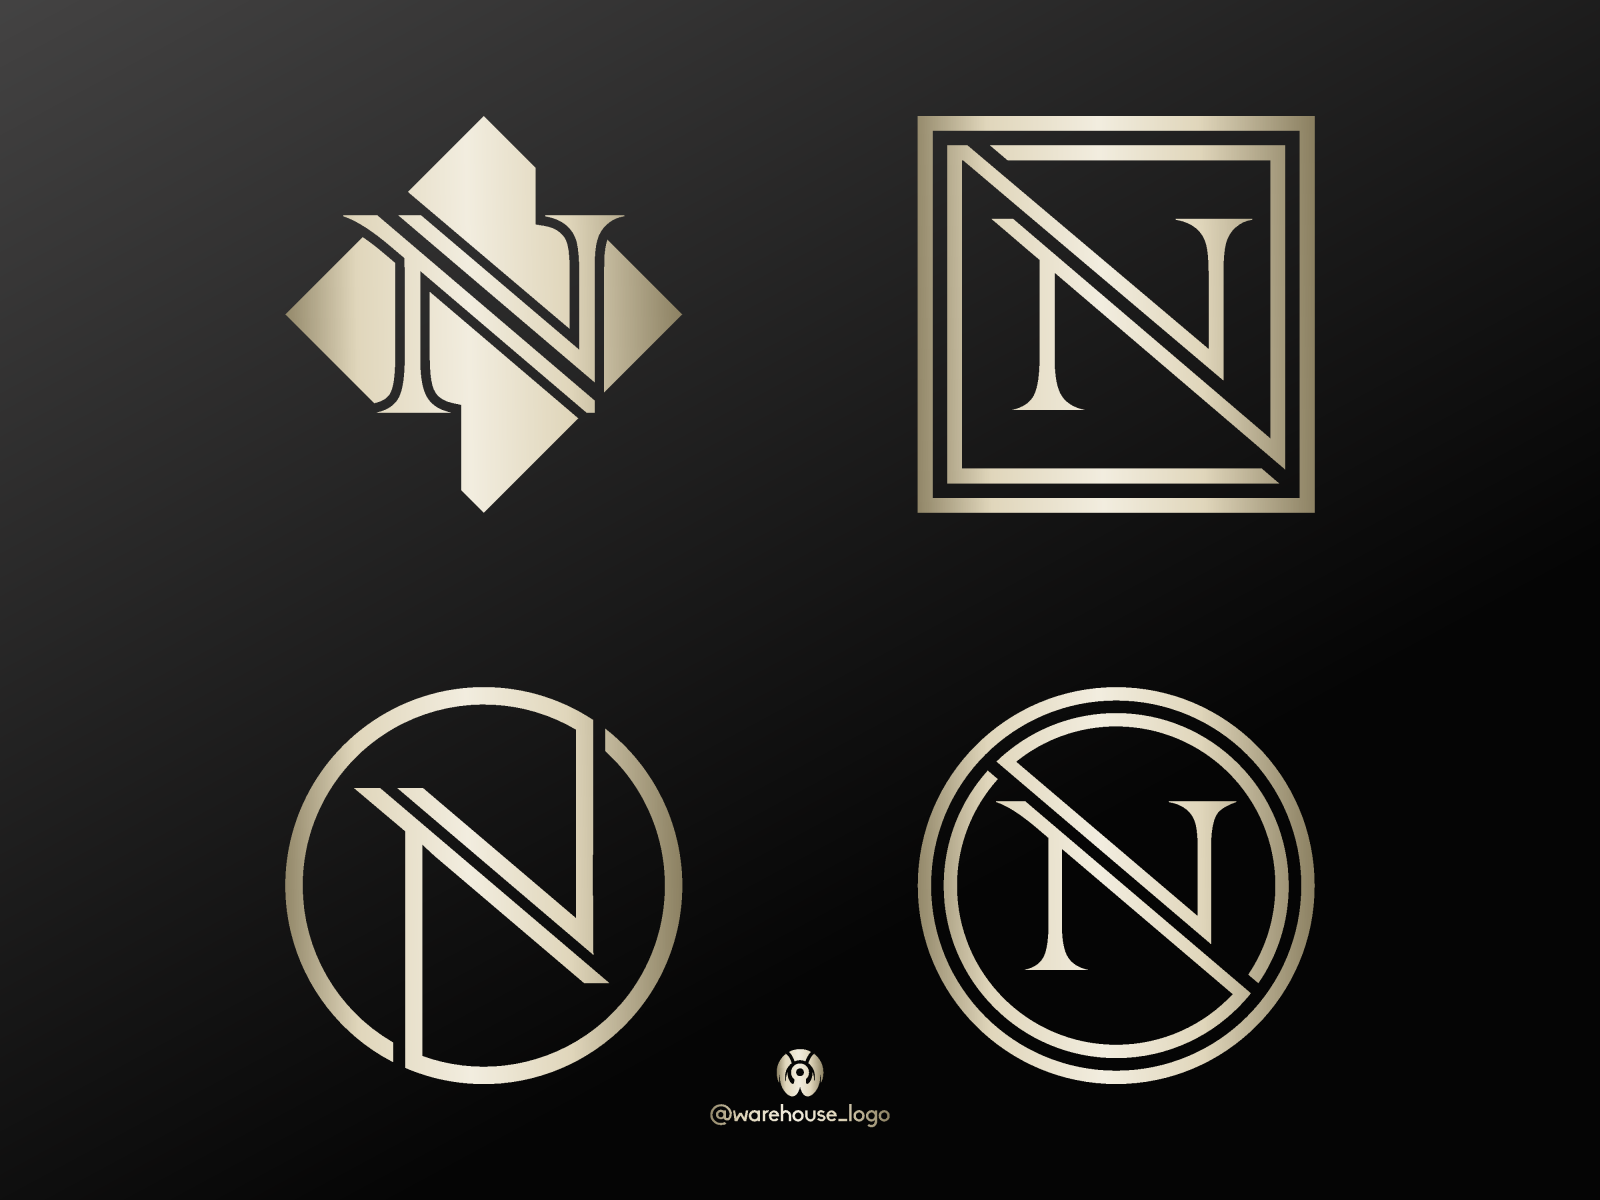 letter n logo collection by warehouse_logo on Dribbble